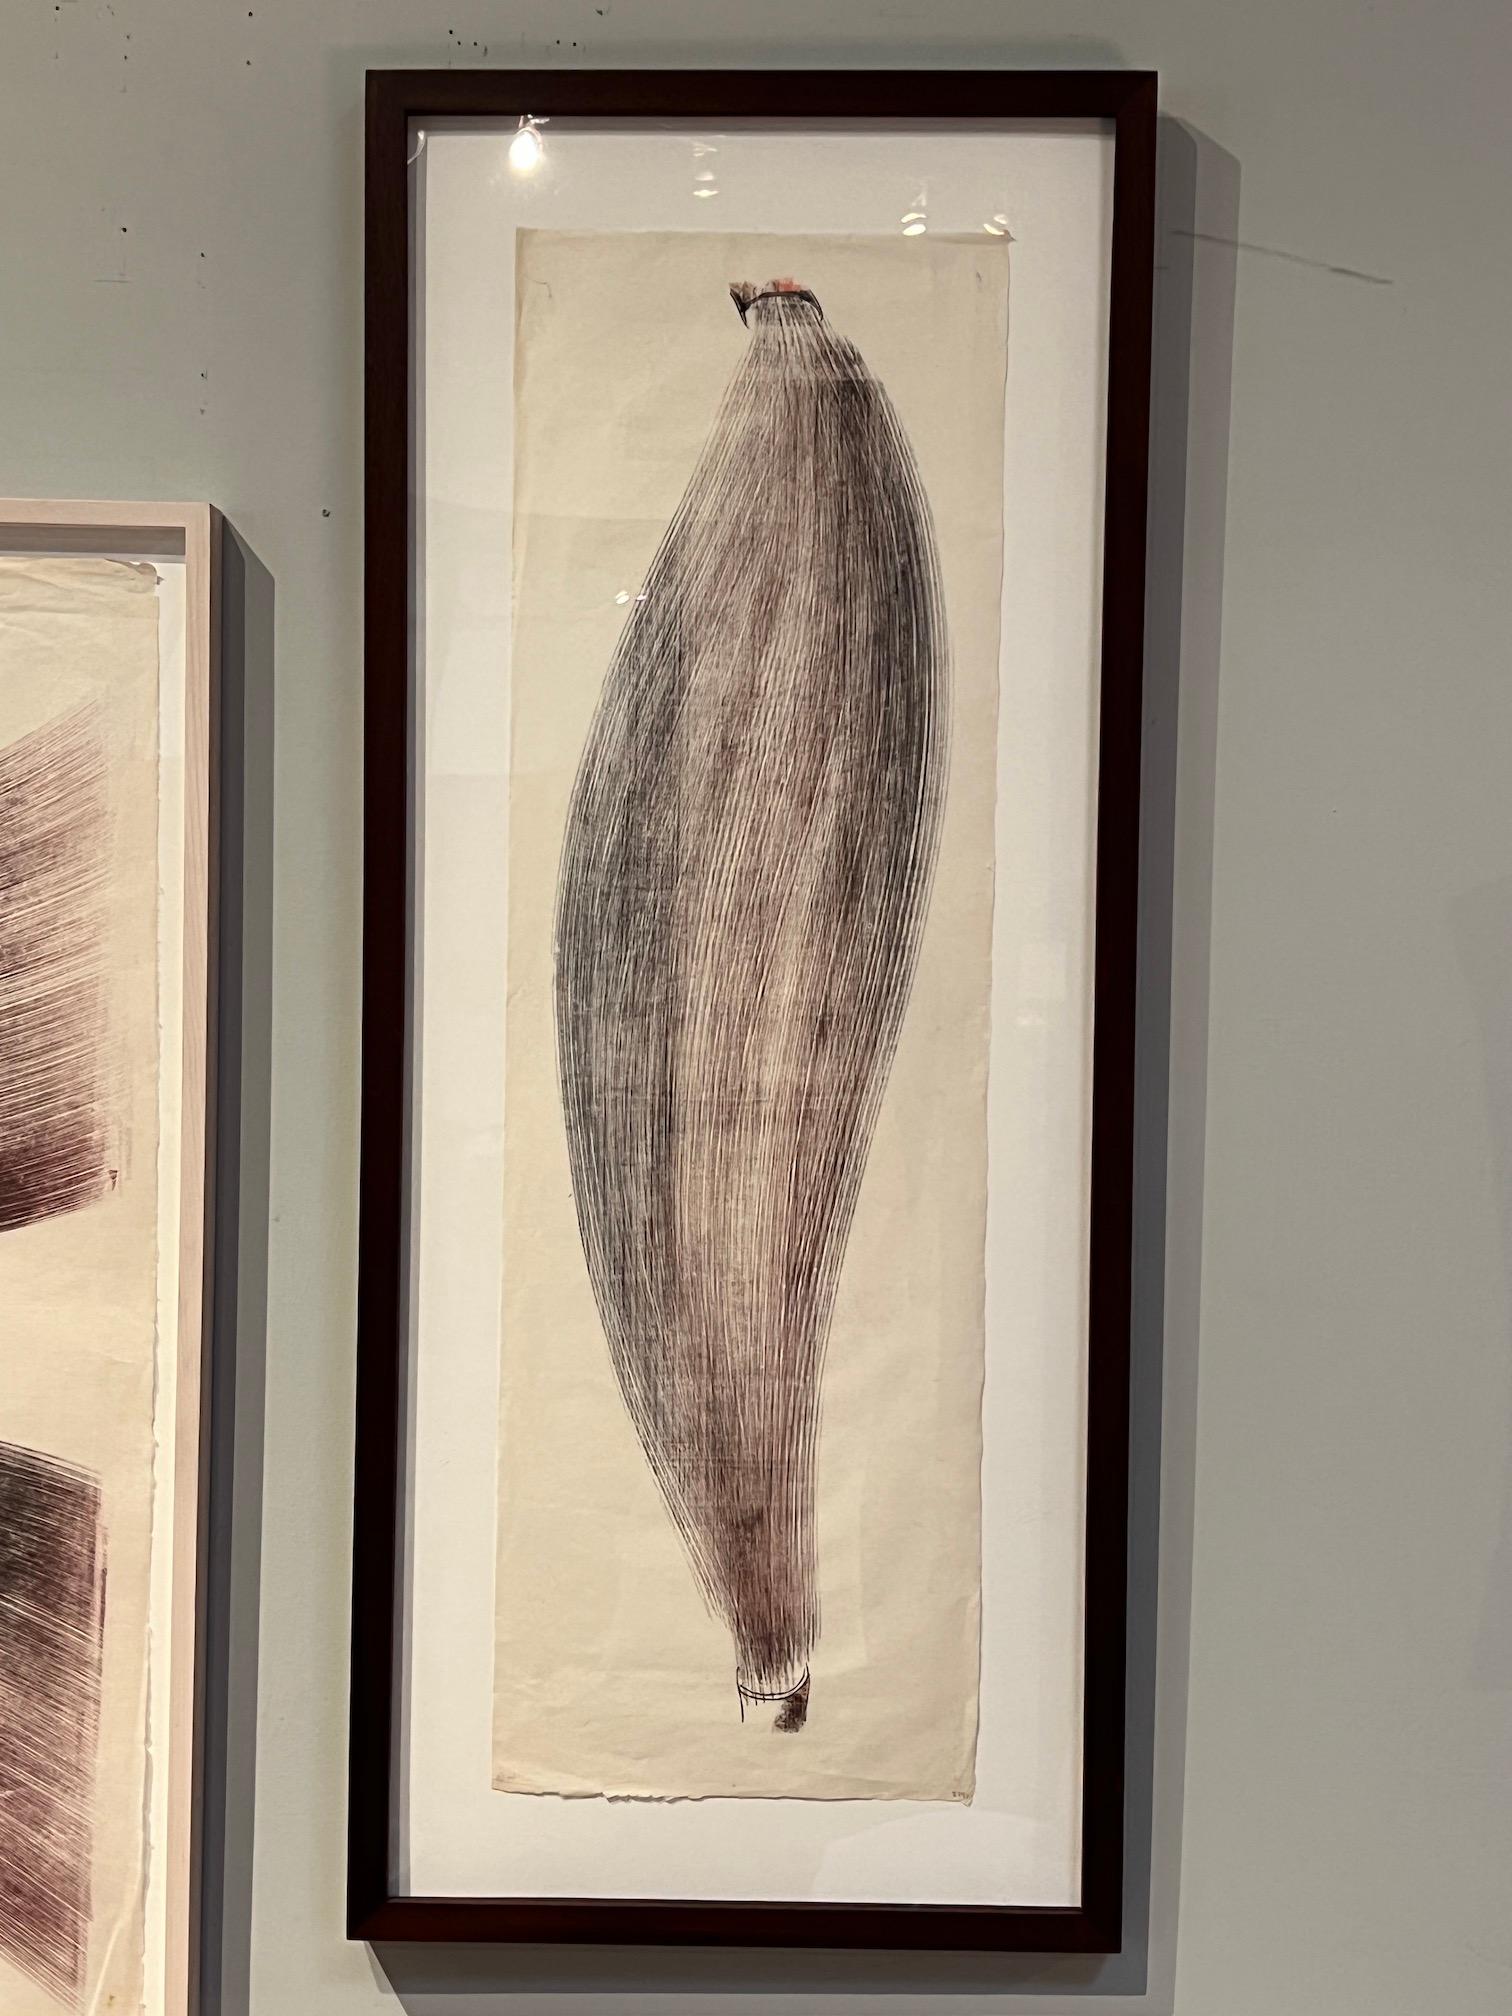 After an intense day of casting and welding mid-century artist Harry Bertoia (American, born Italian. 1915-1978) would unwind by creating one-of-a-kind prints, laying rice paper on a blank inked plate and manipulating the image from the back side of